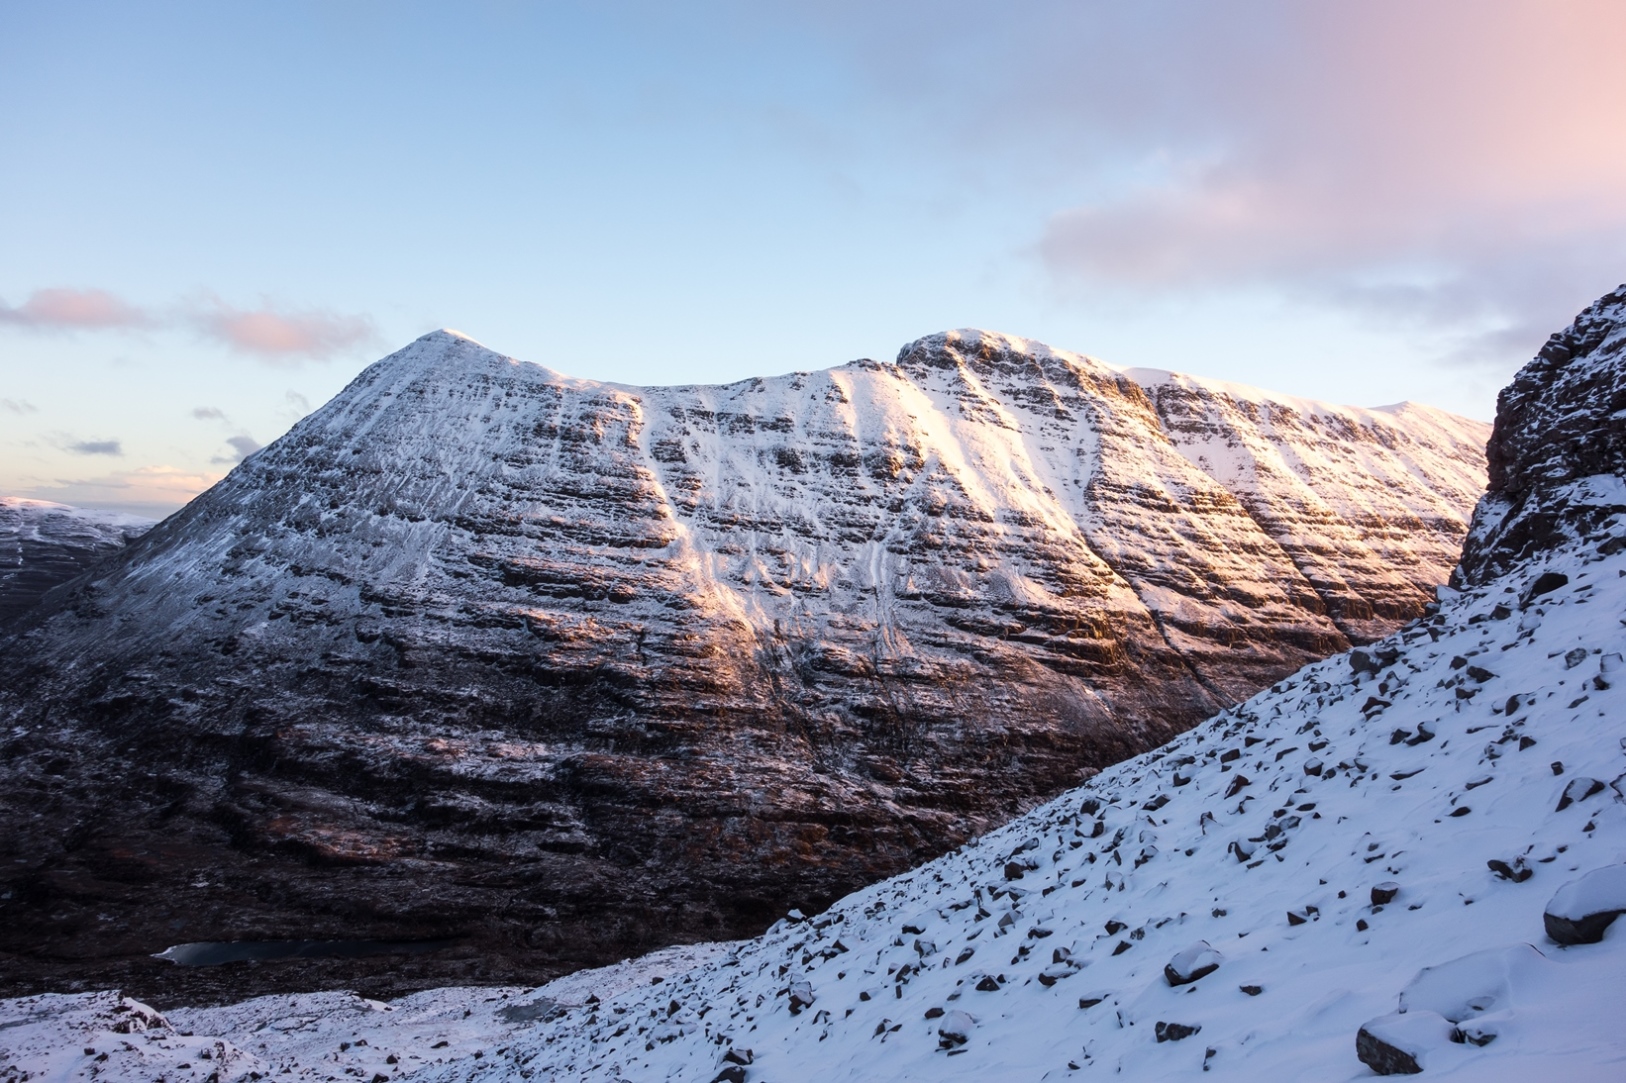 The south flank of Beinn Eighe bathed in serene early morning light